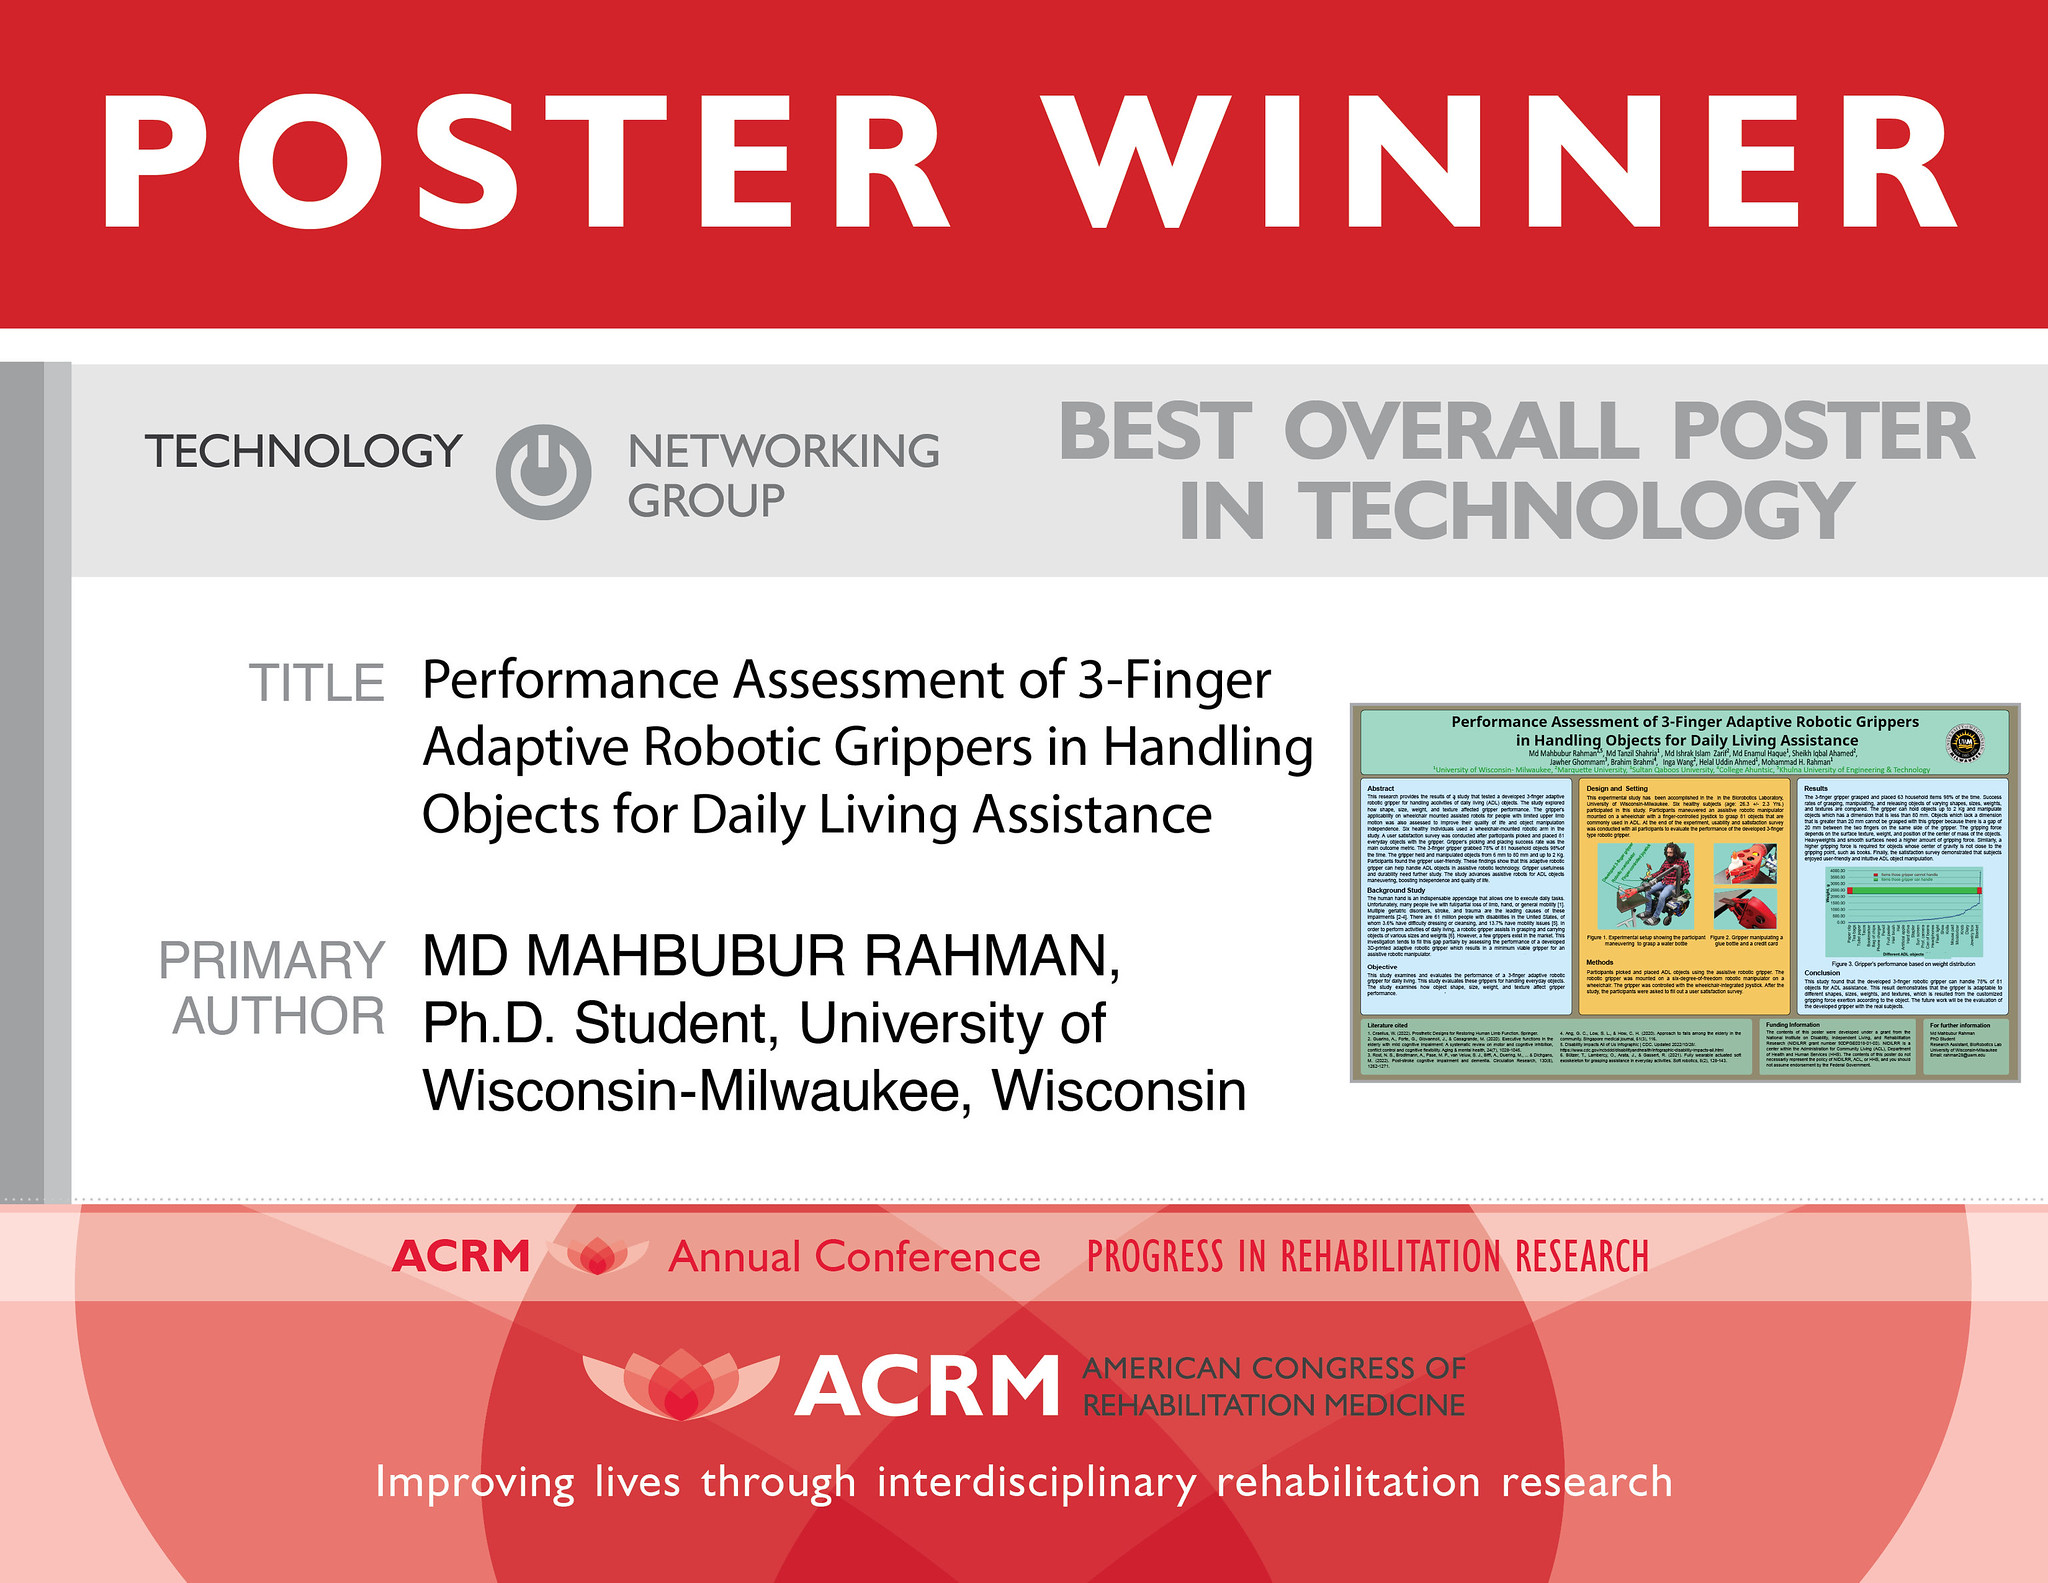 Best Overall Poster in Technology Award